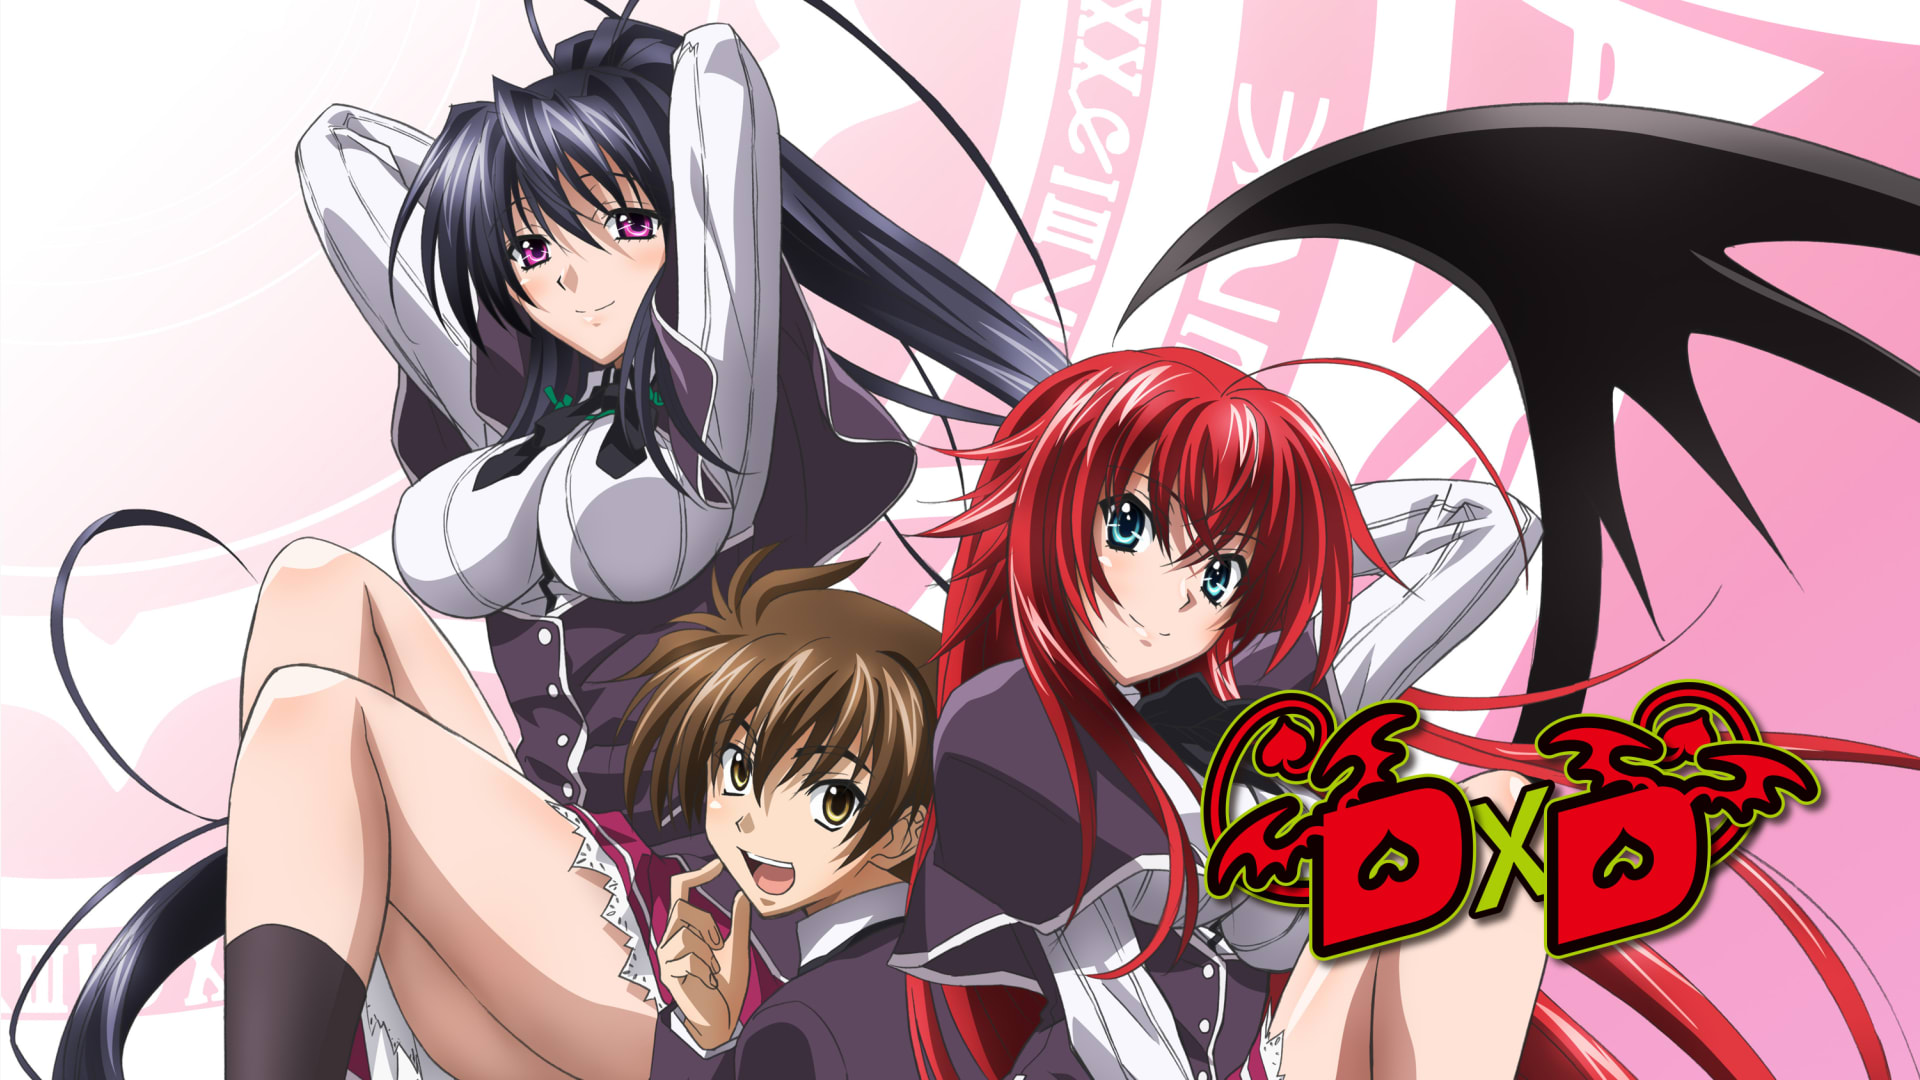 corey hayslett recommends highschool dxd episode 5 pic